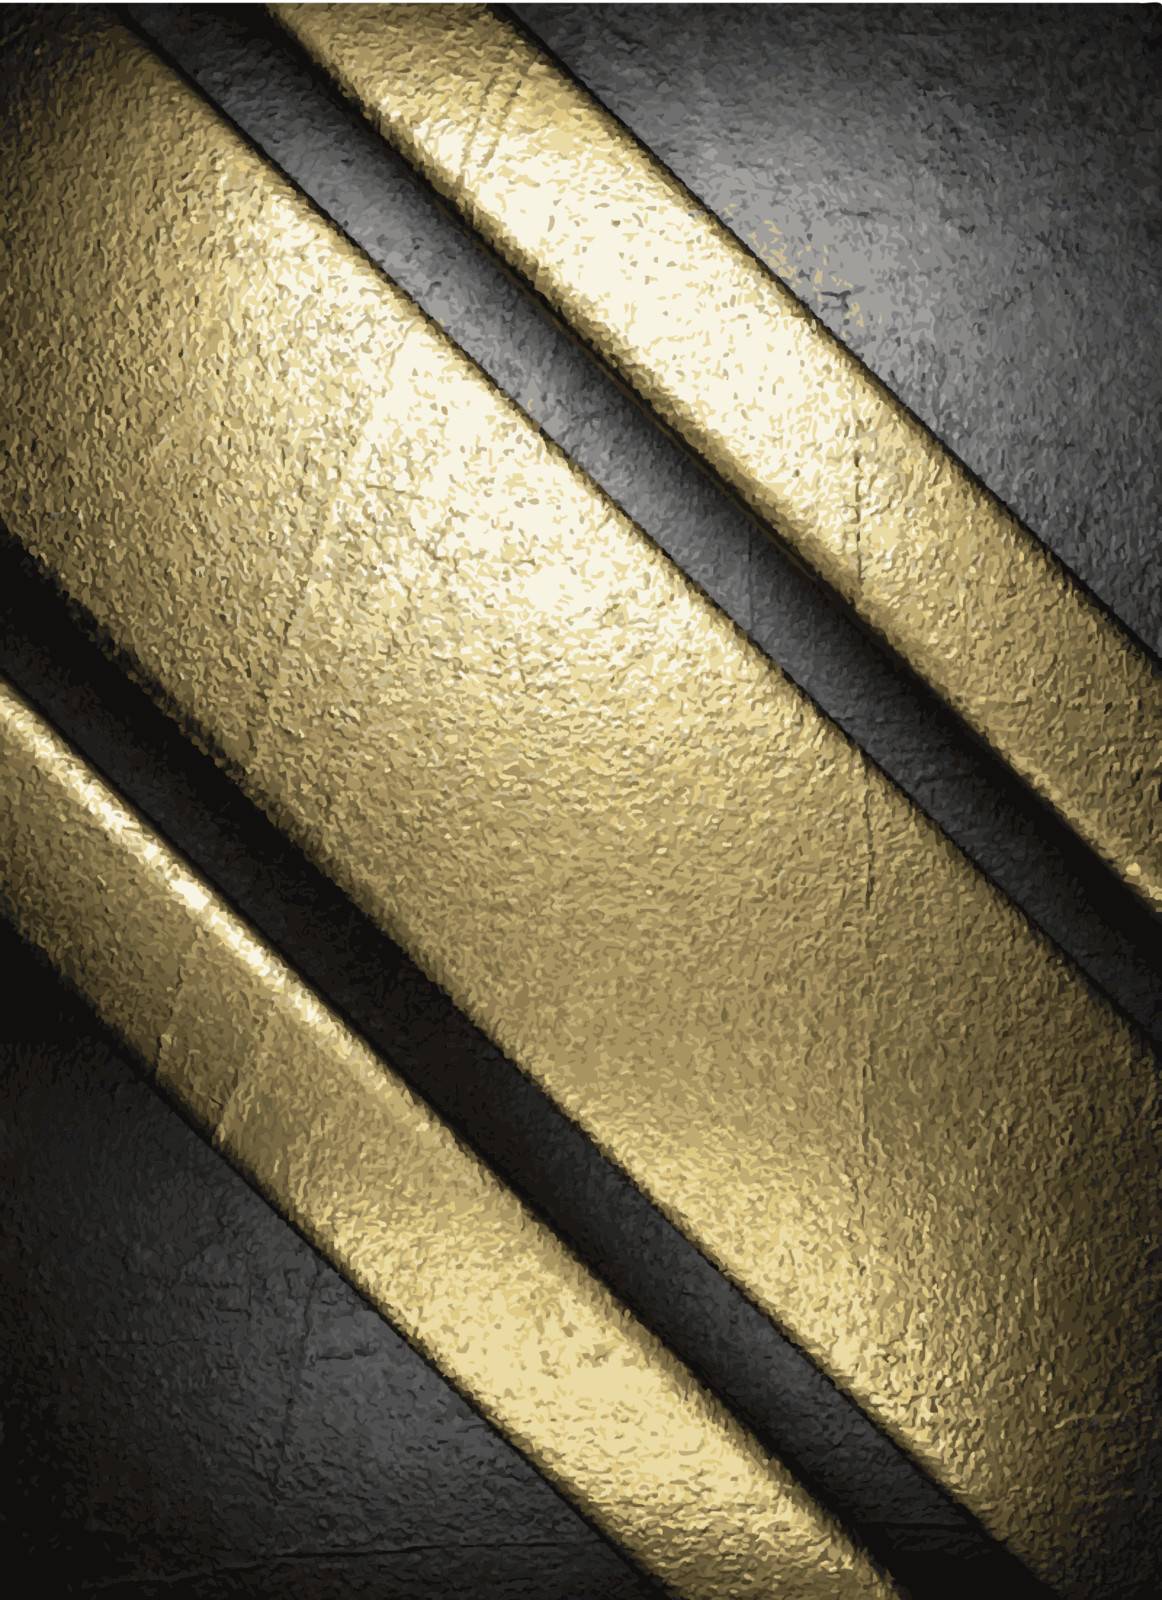 gold and silver background by videodoctor